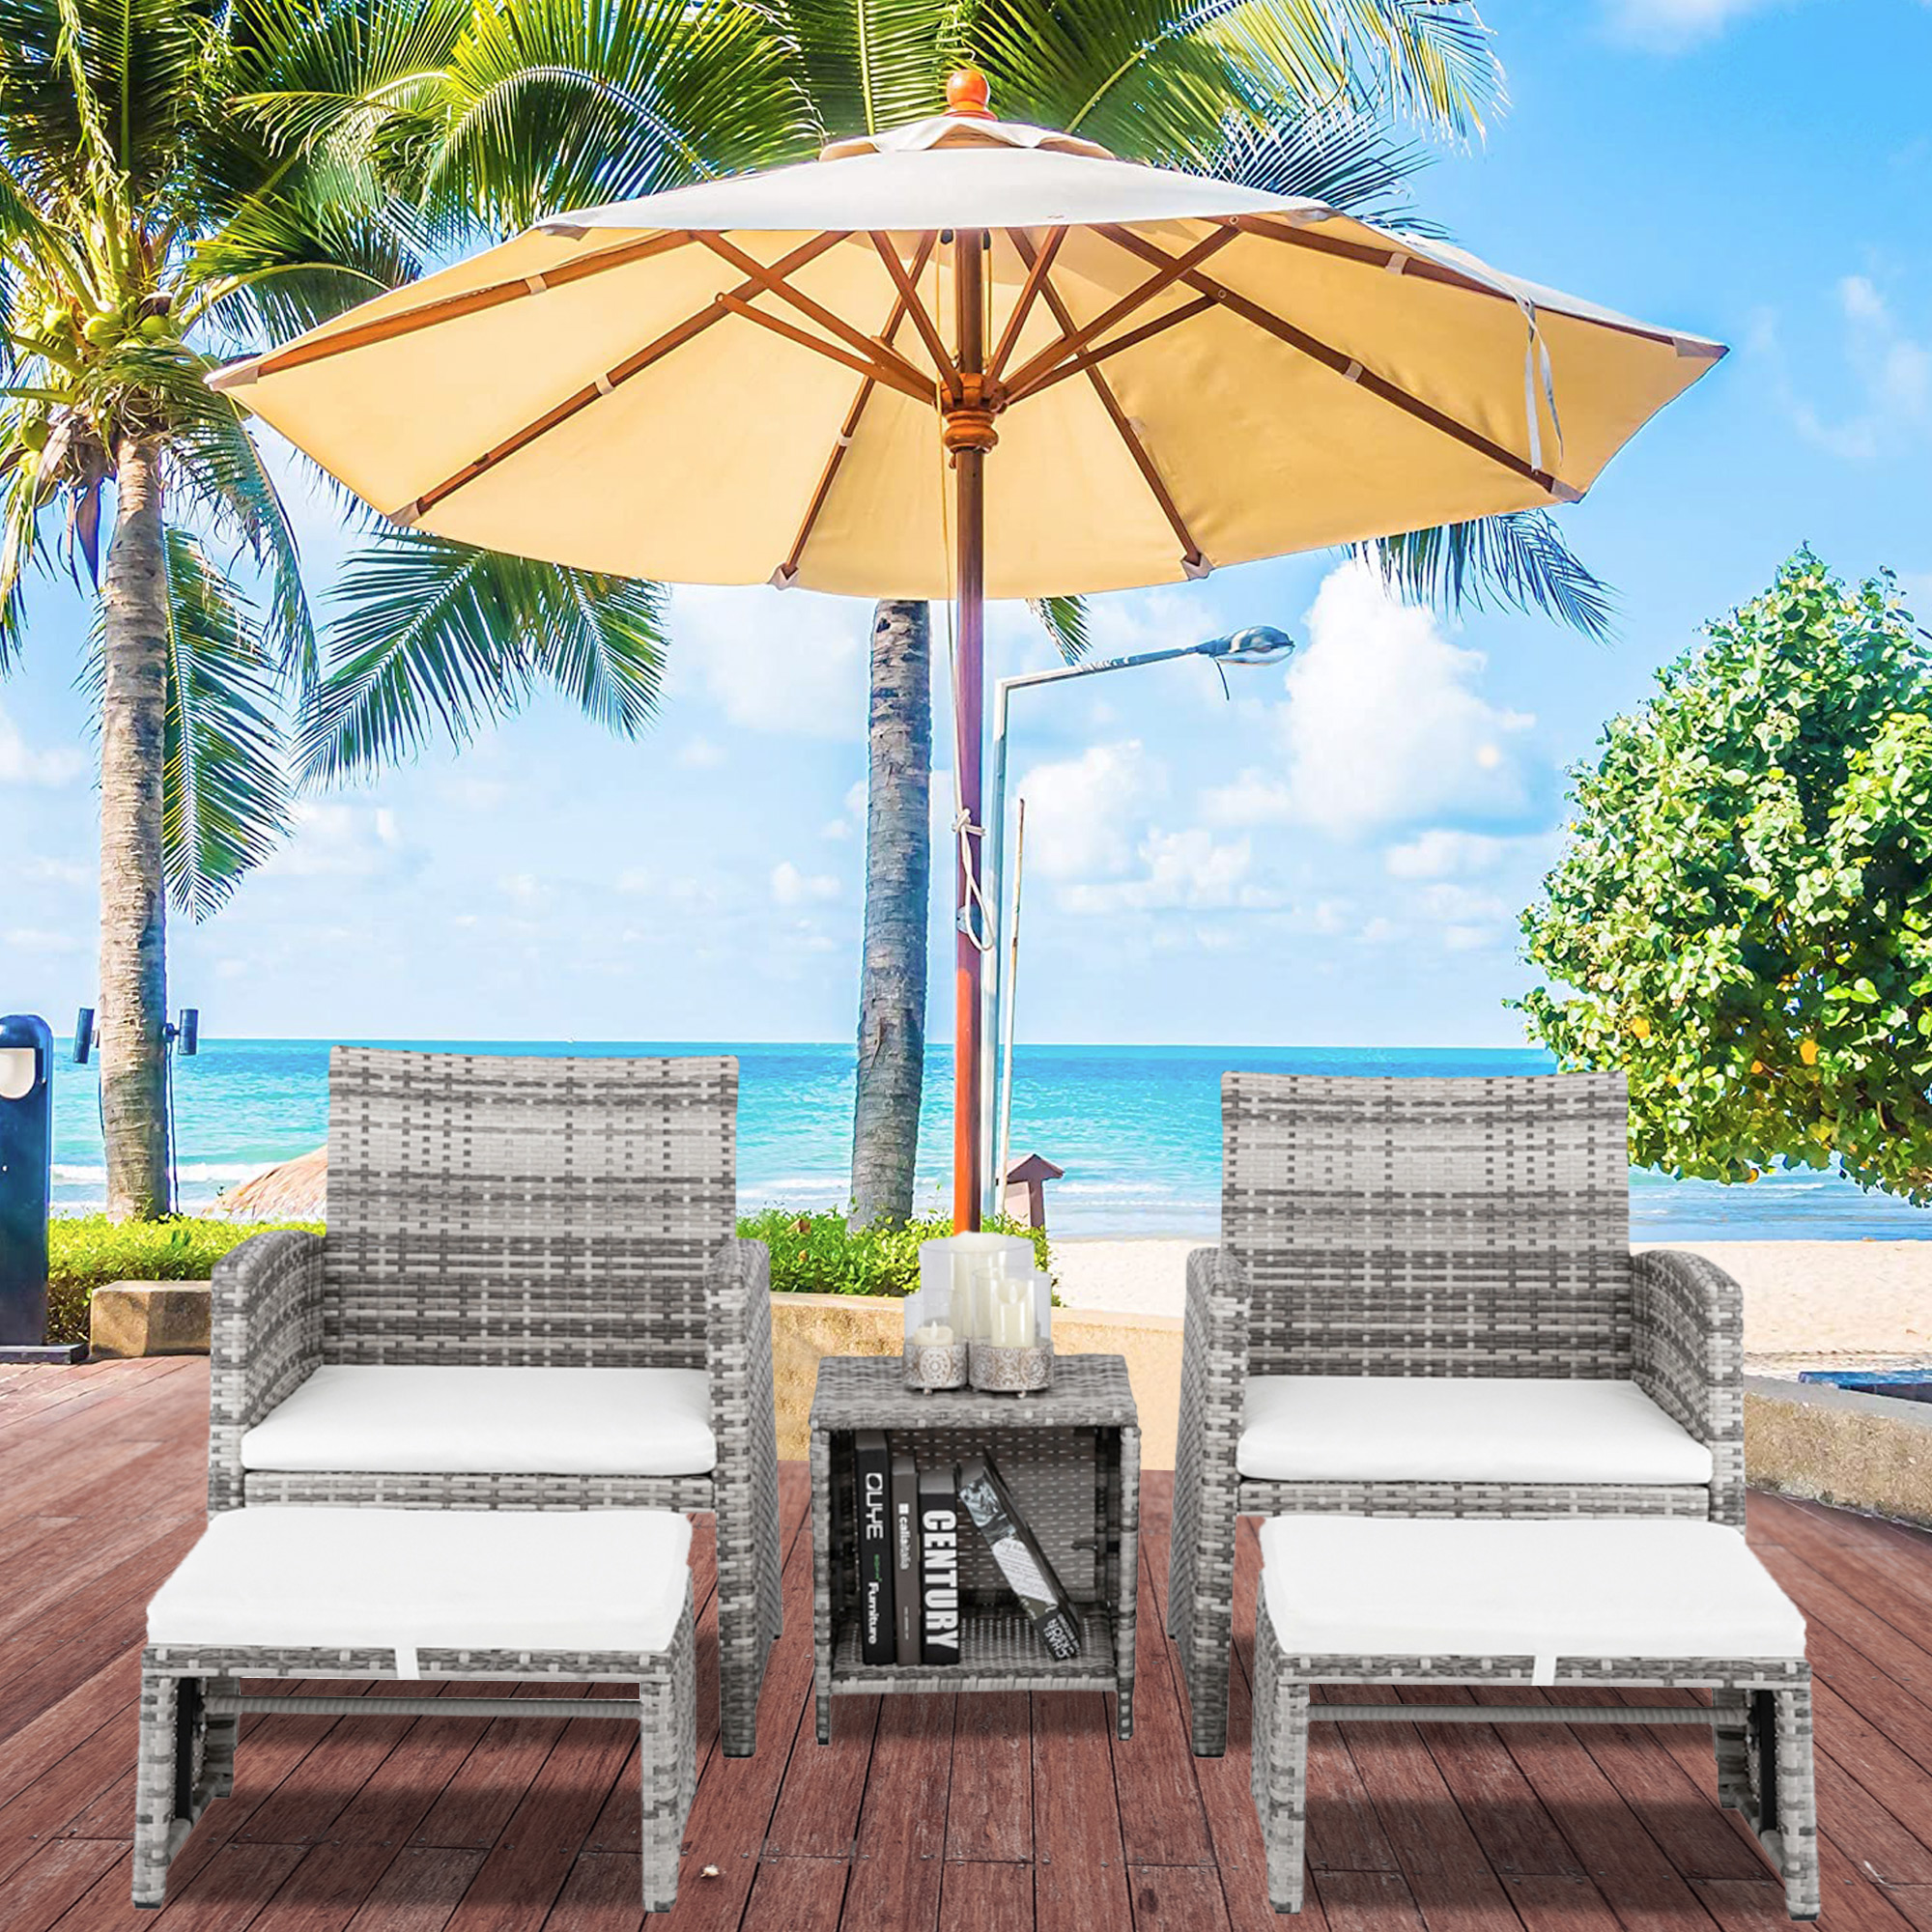 5 PCS Outdoor Rattan Furniture Set, Patio Lounge Chairs with Ottoman Footrest, All Weather Cushioned Outside Sectional Furniture Set for Backyard, Deck, Balcony, GE030 - image 3 of 12